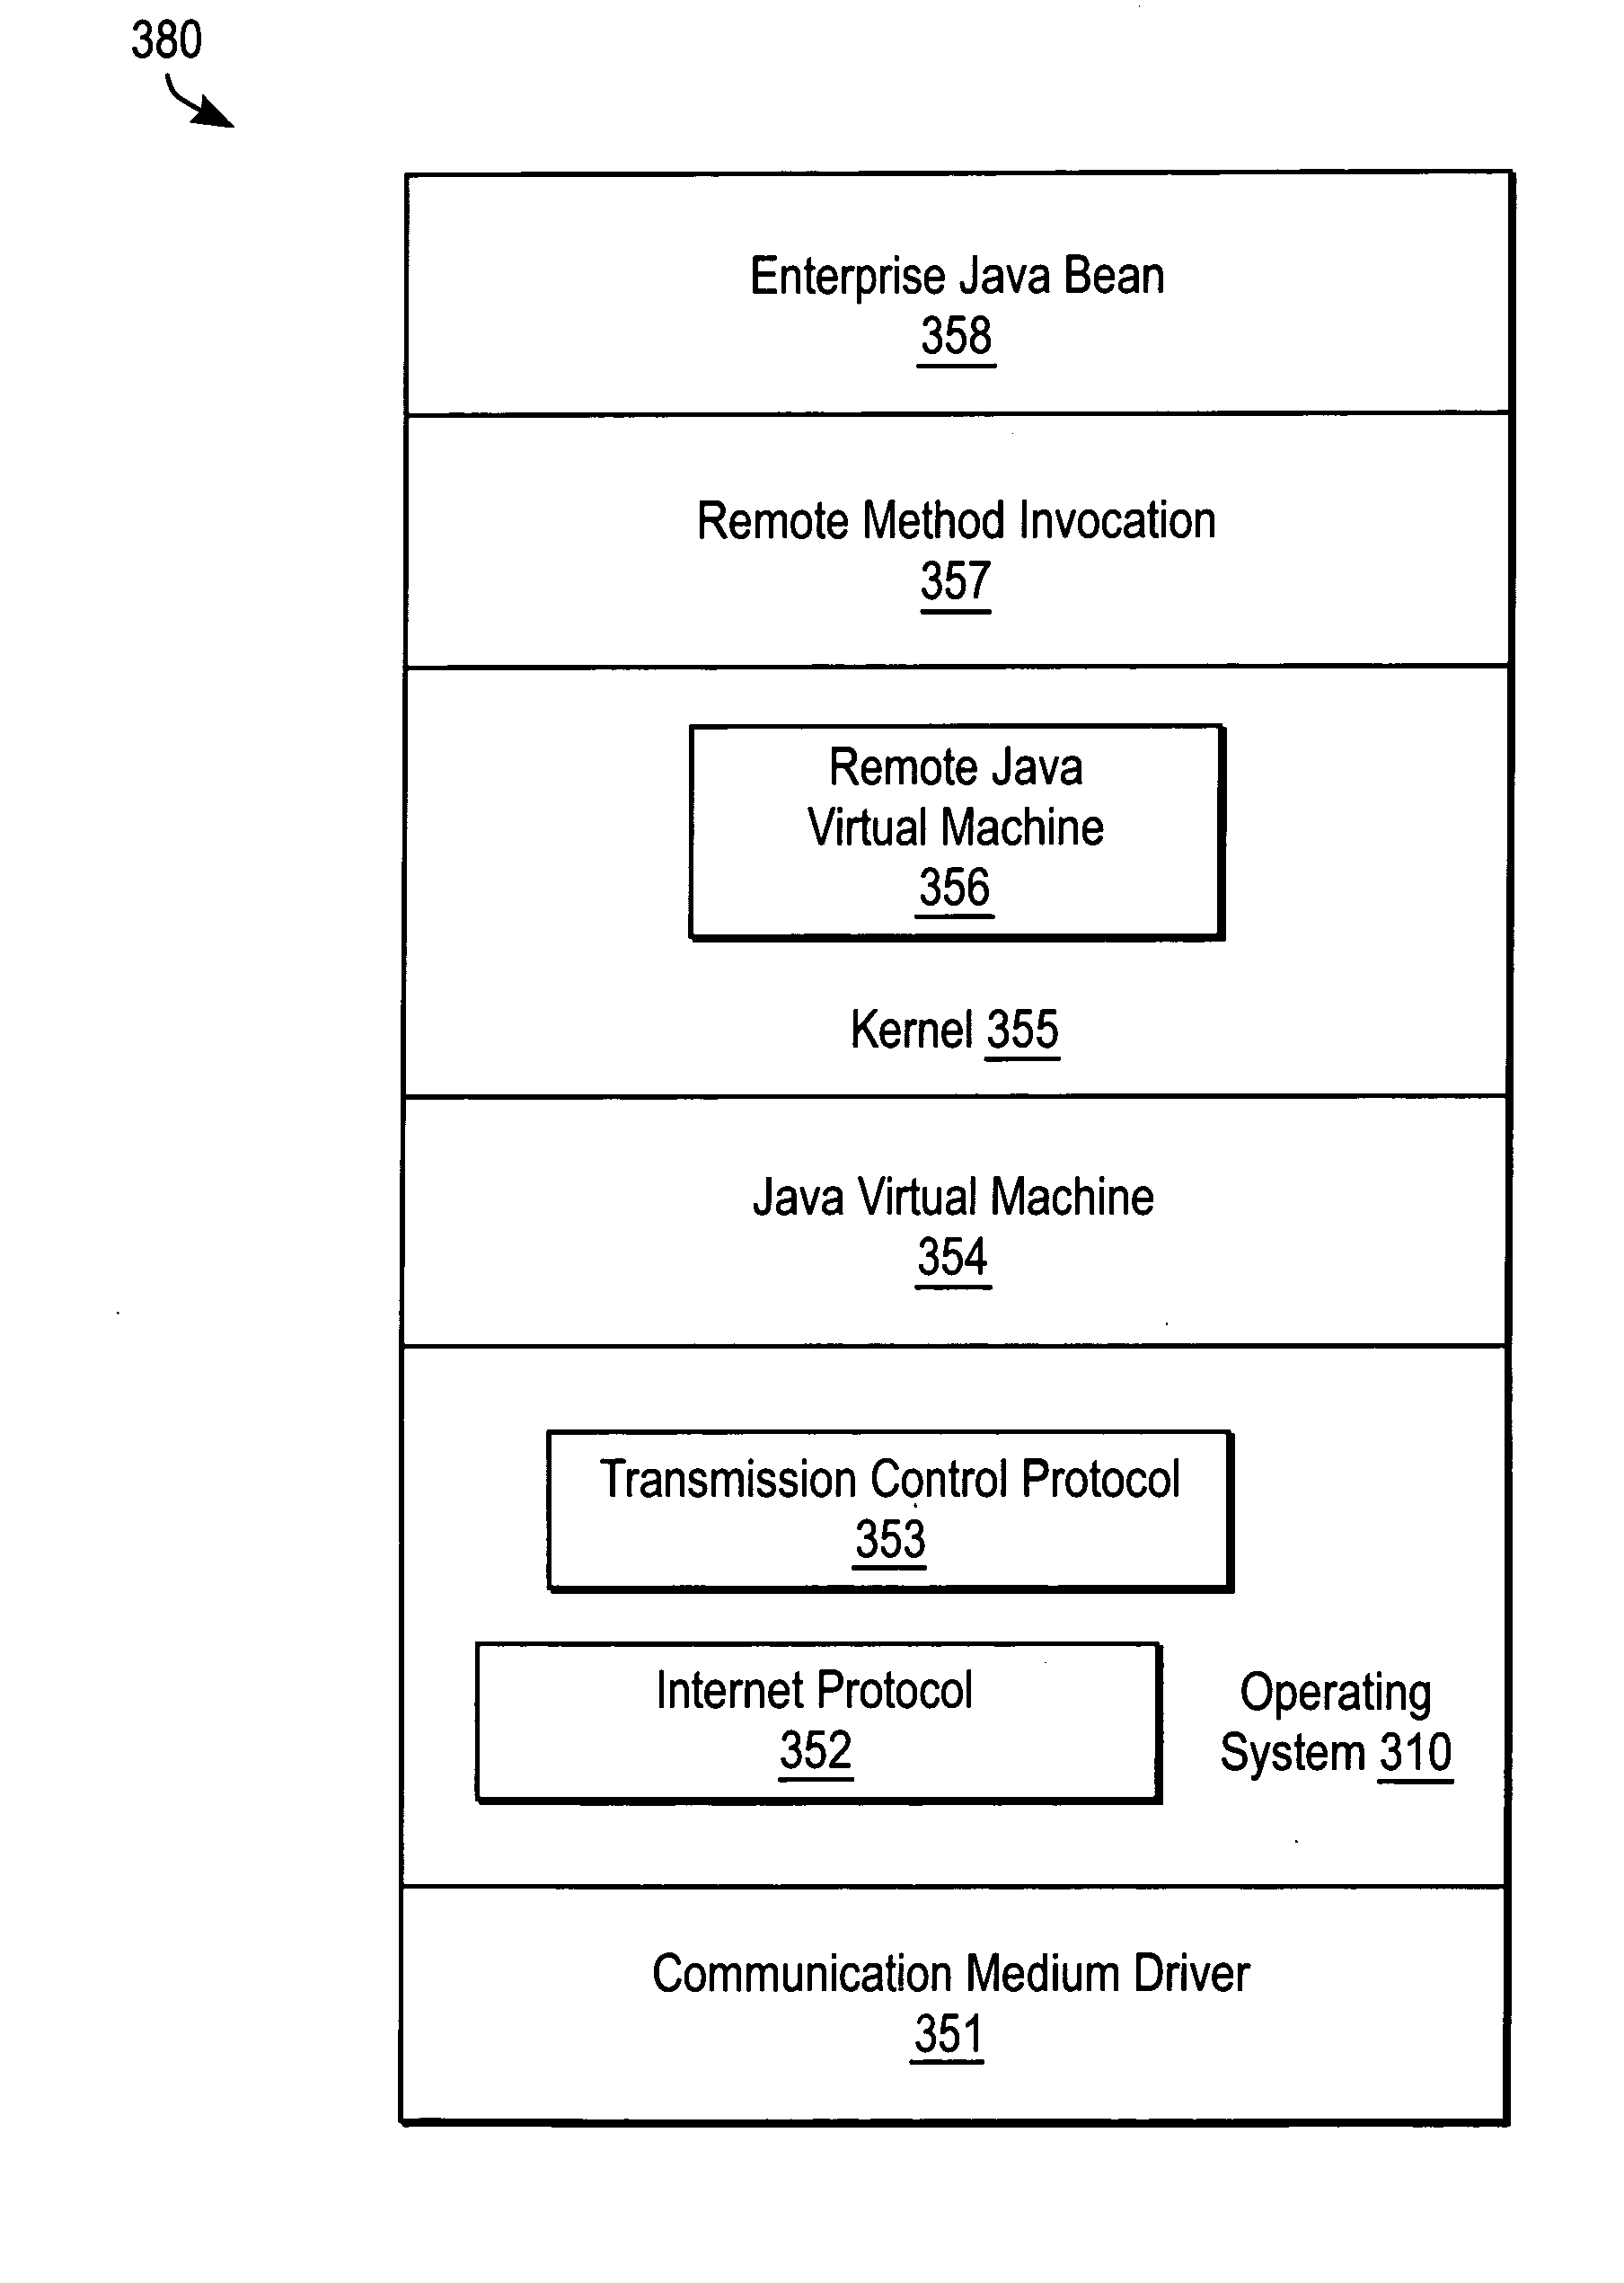 Clustered enterprise JavaTM in a secure distributed processing system